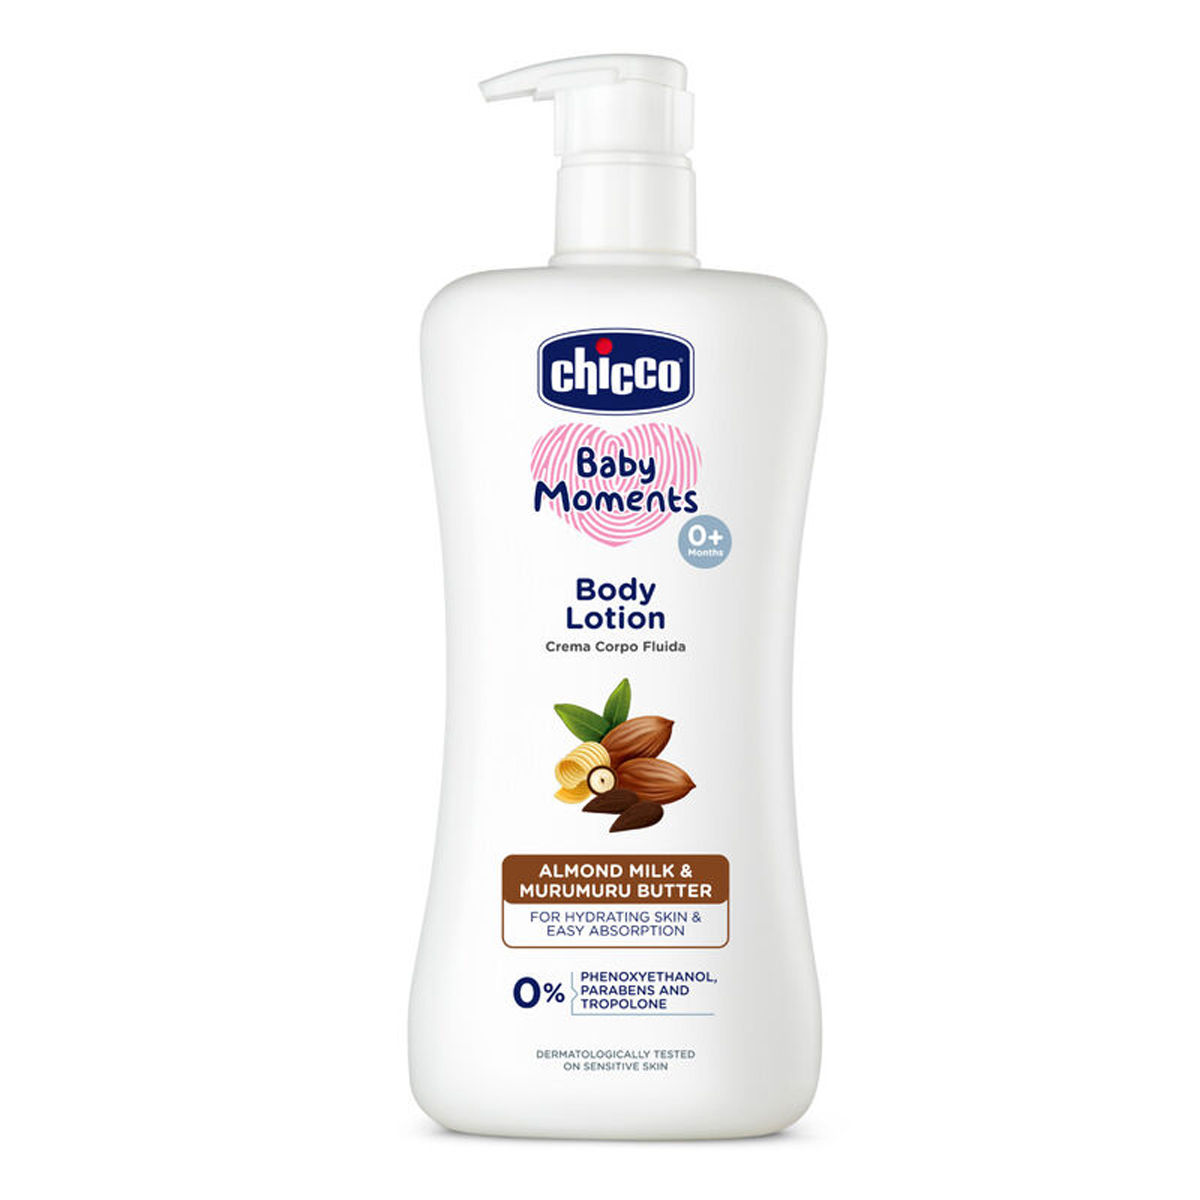 Chicco Baby Moments Body Lotion, 500 ml, Pack of 1 